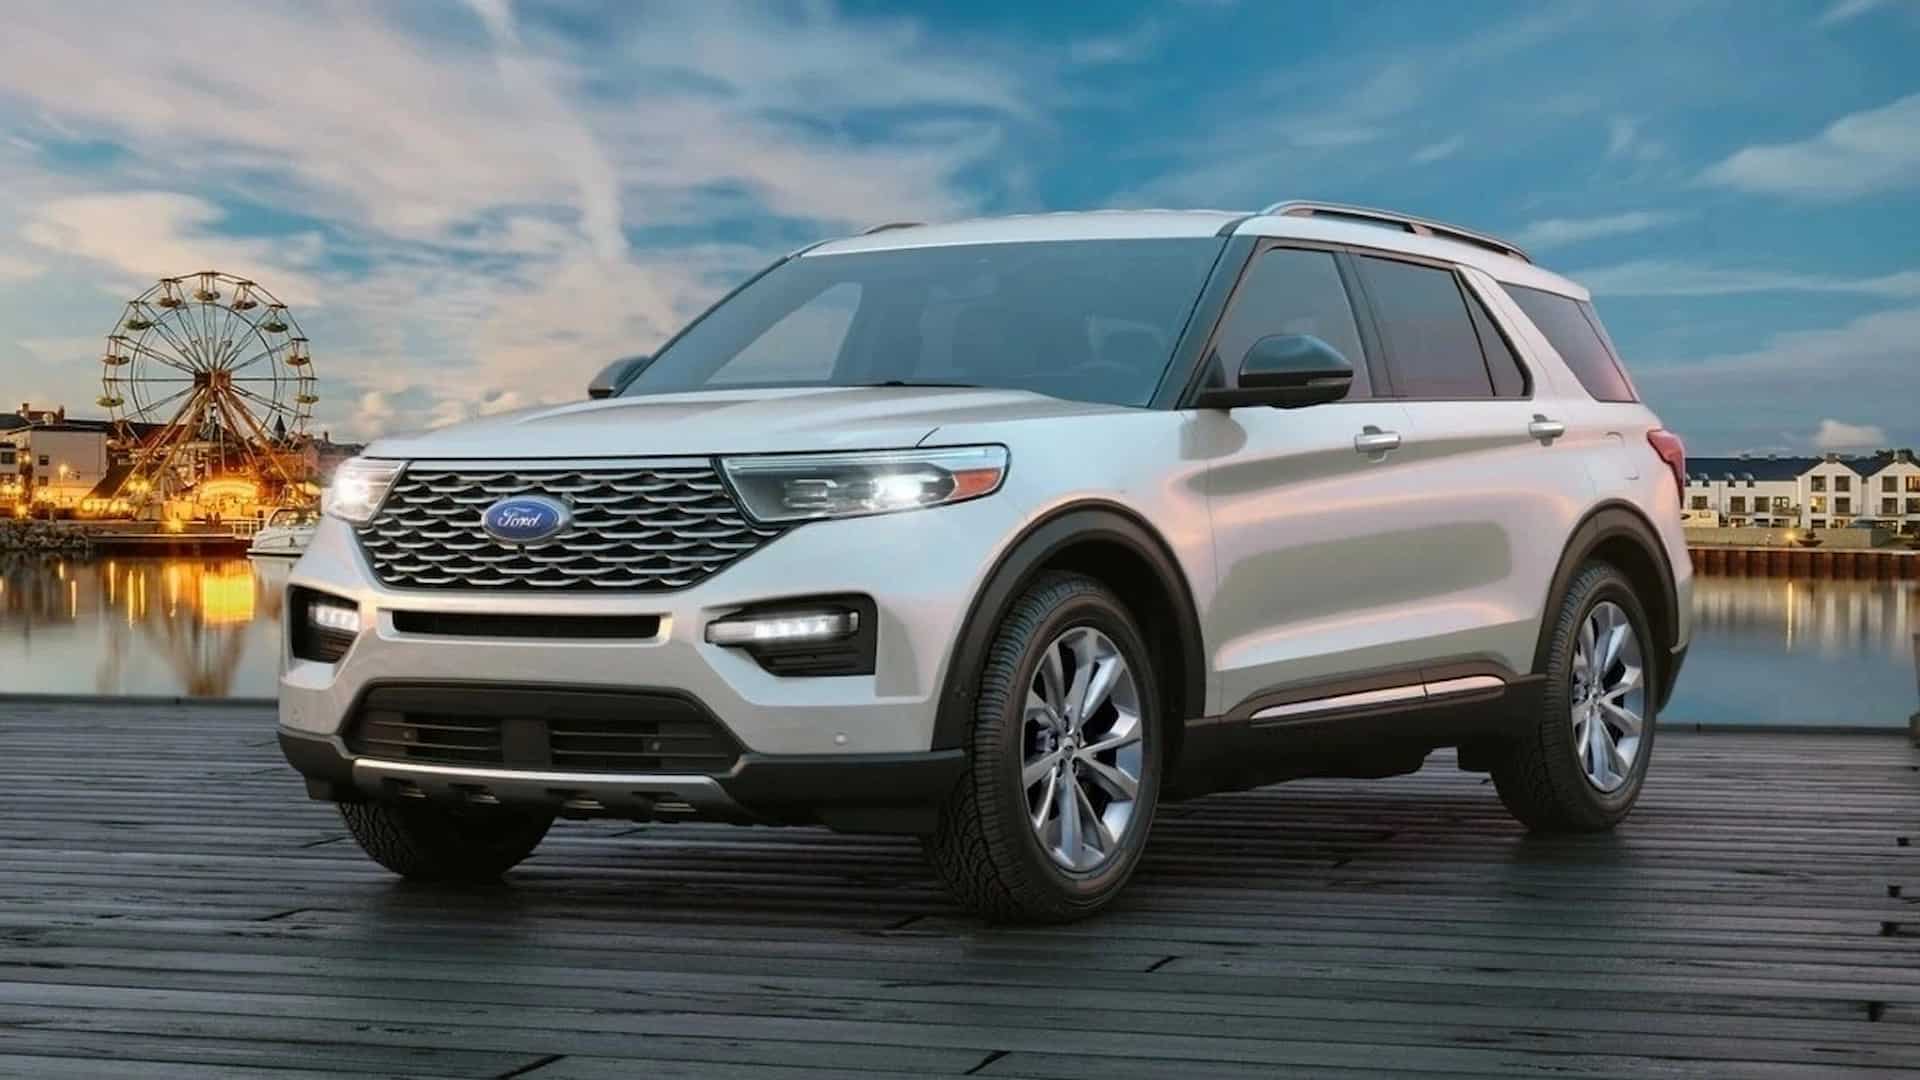 Front view of white 2023 Ford Explorer best selling midsize SUV and also the most unreliable